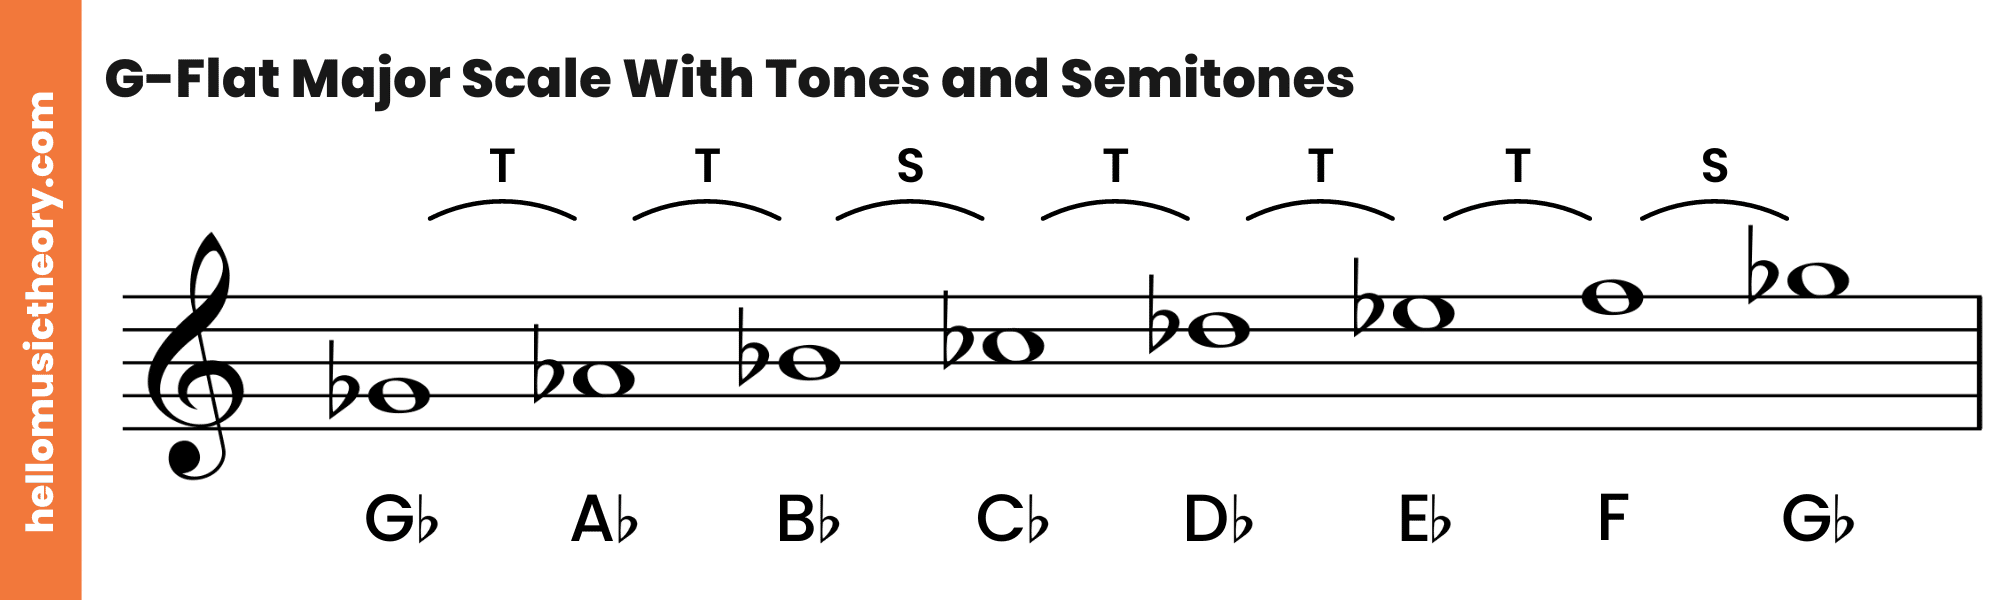 G-Flat Major Scale Treble Clef With Tones and Semitones